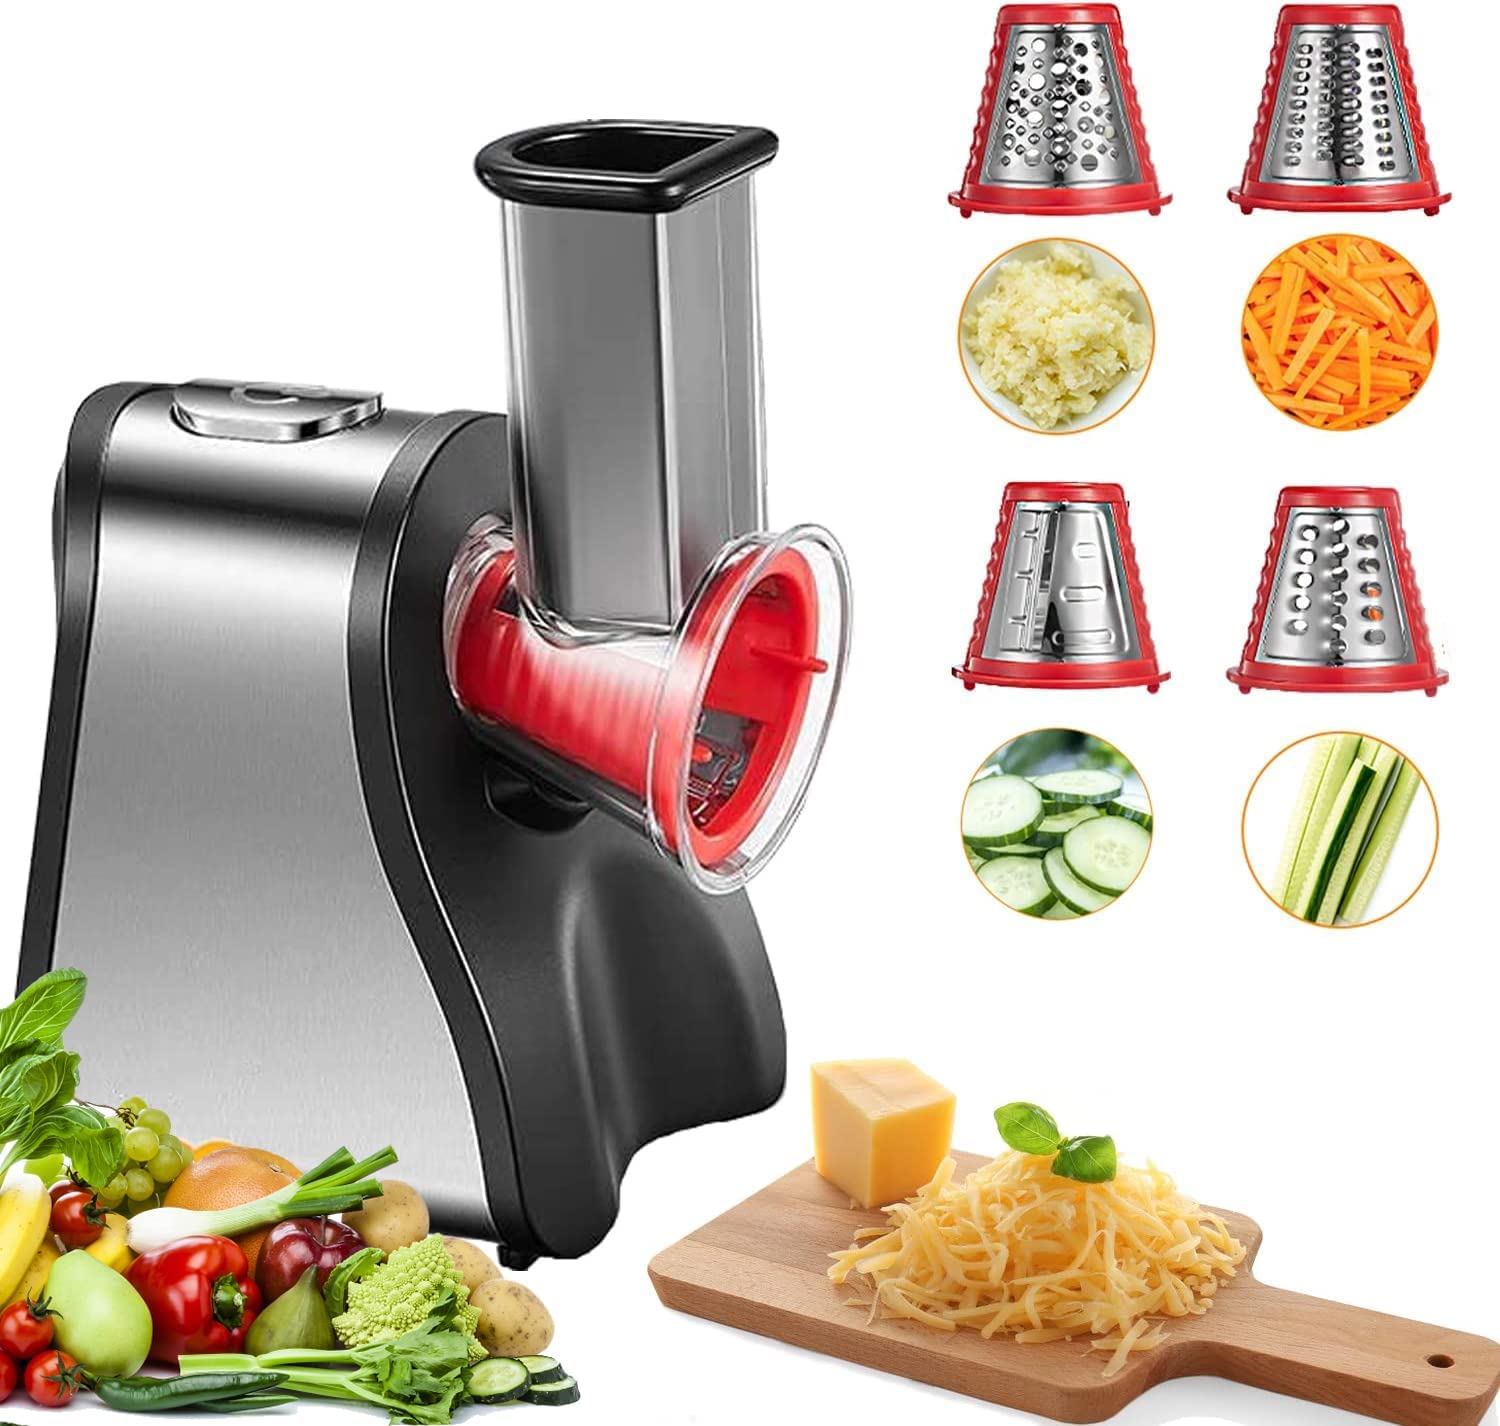 How to Make Electric Onion Slicer. 